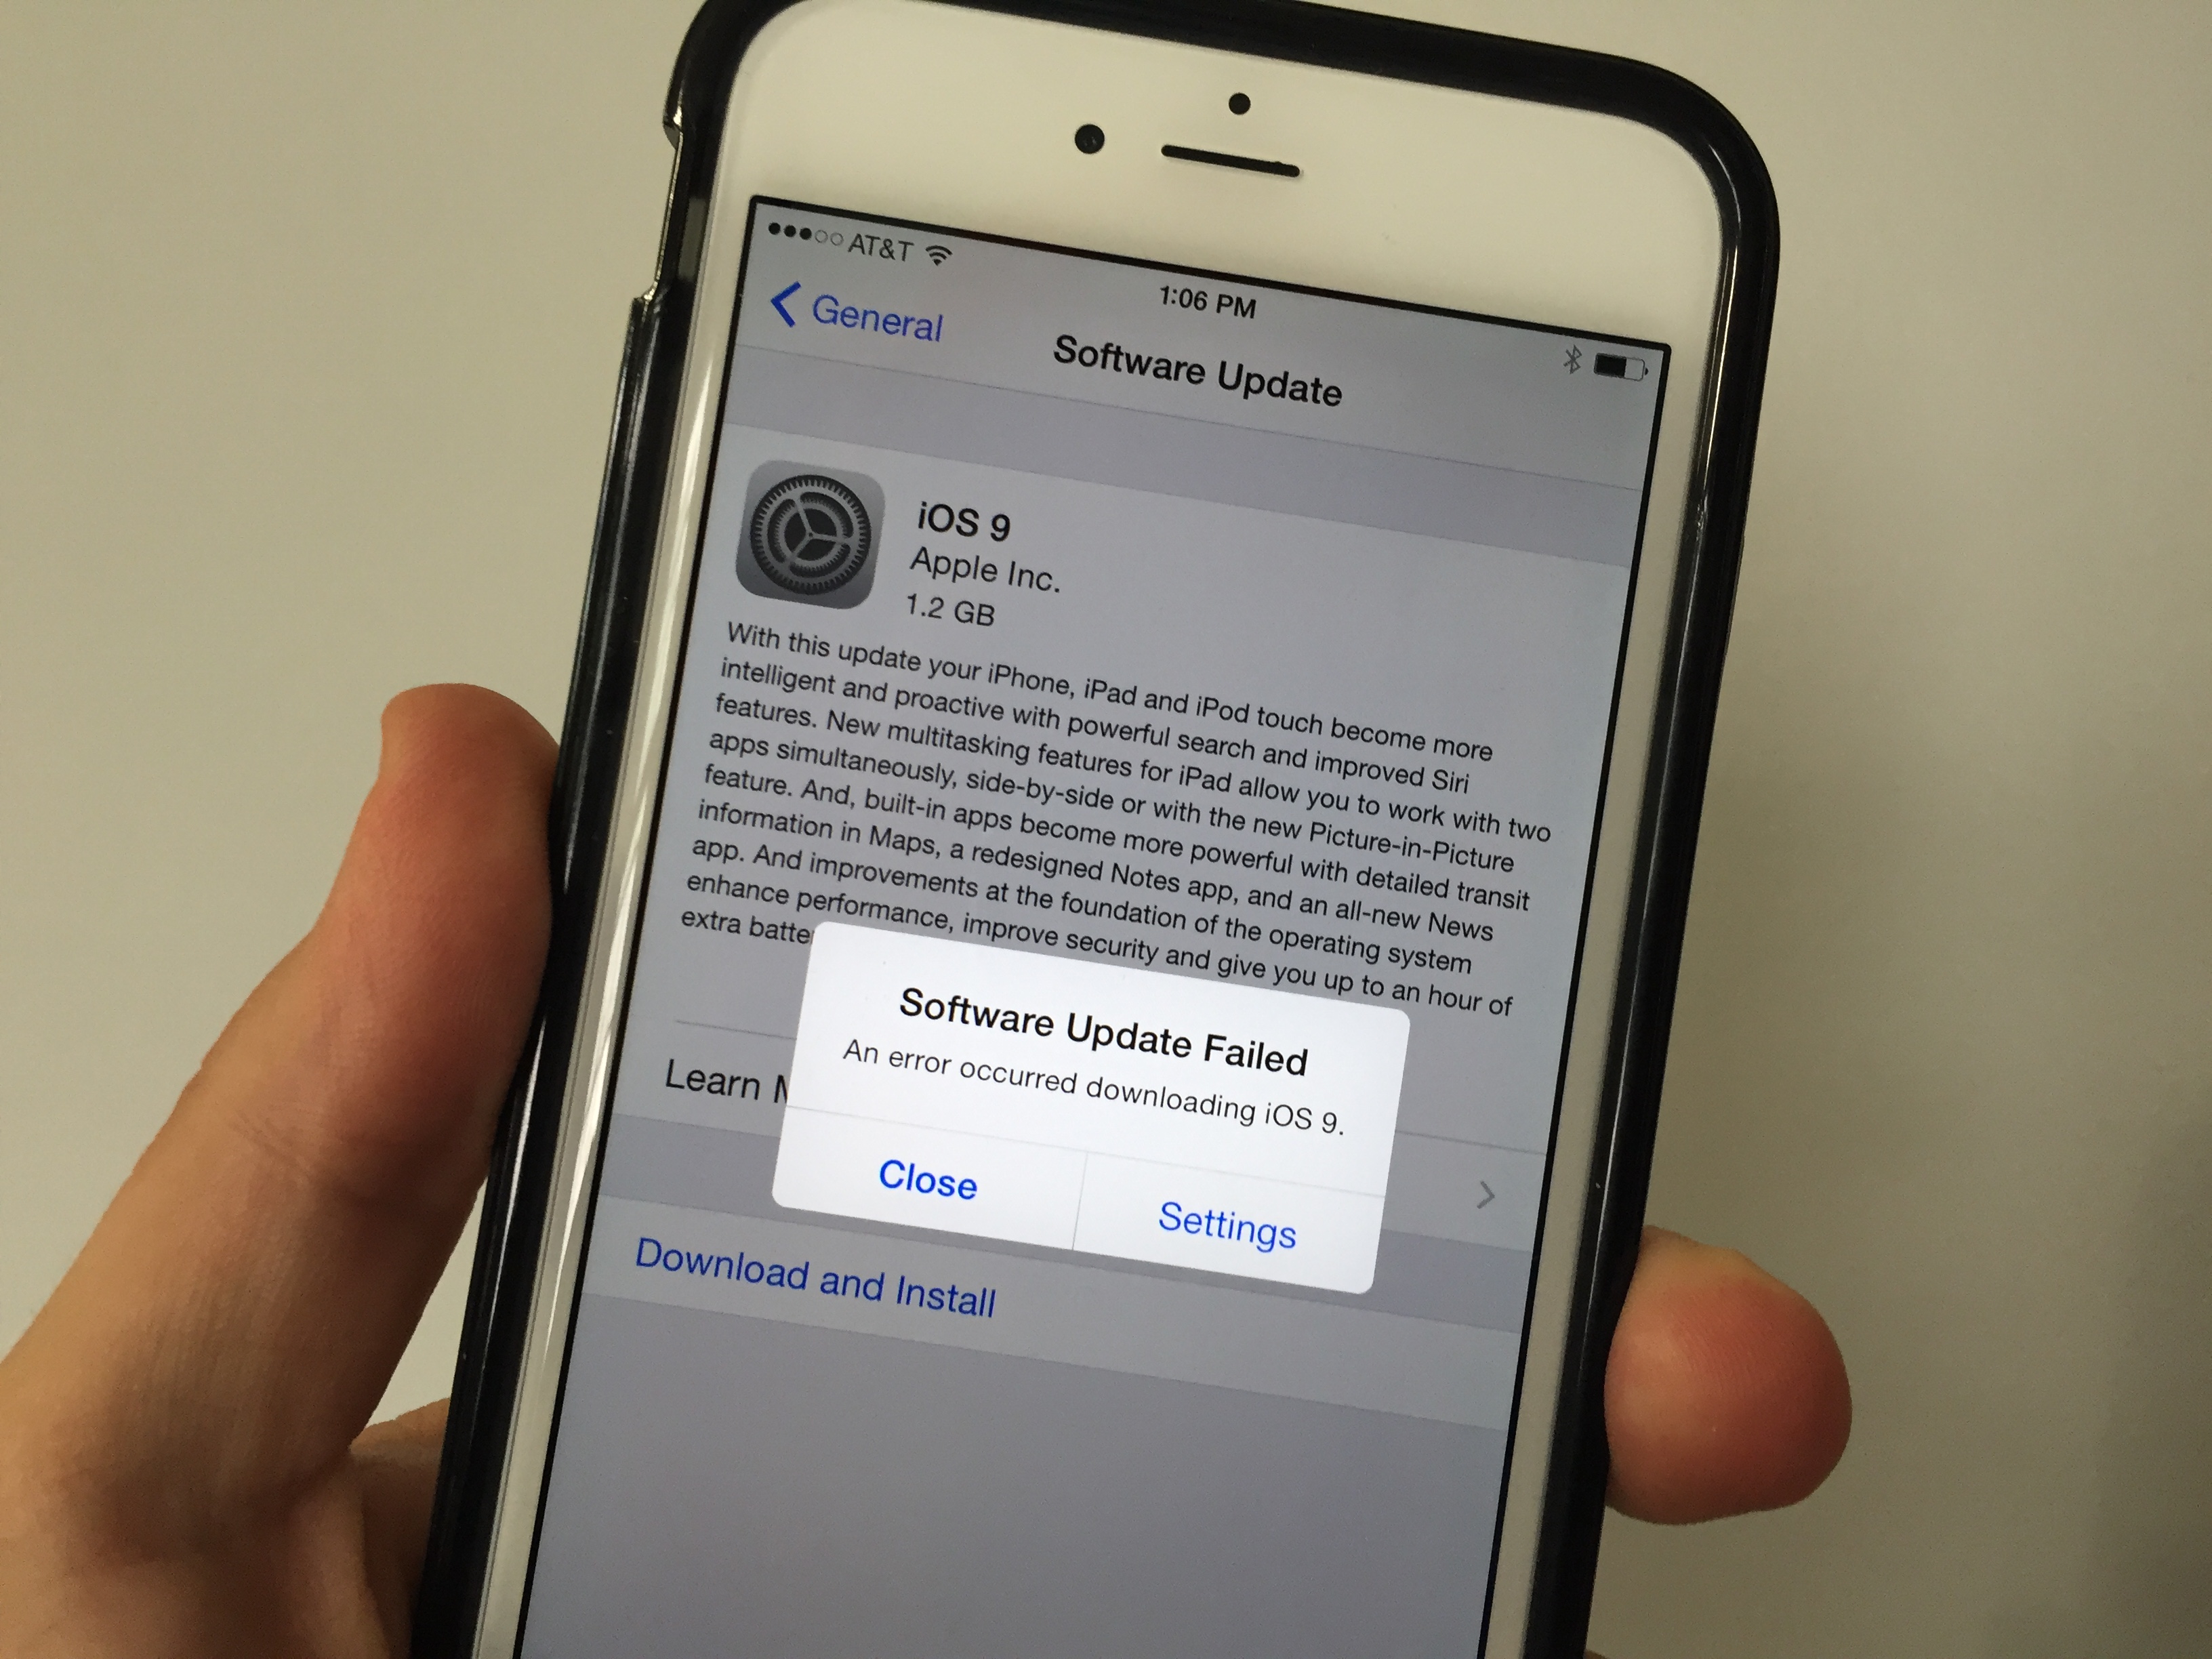 Many users see the iOS 9 software update failed error.